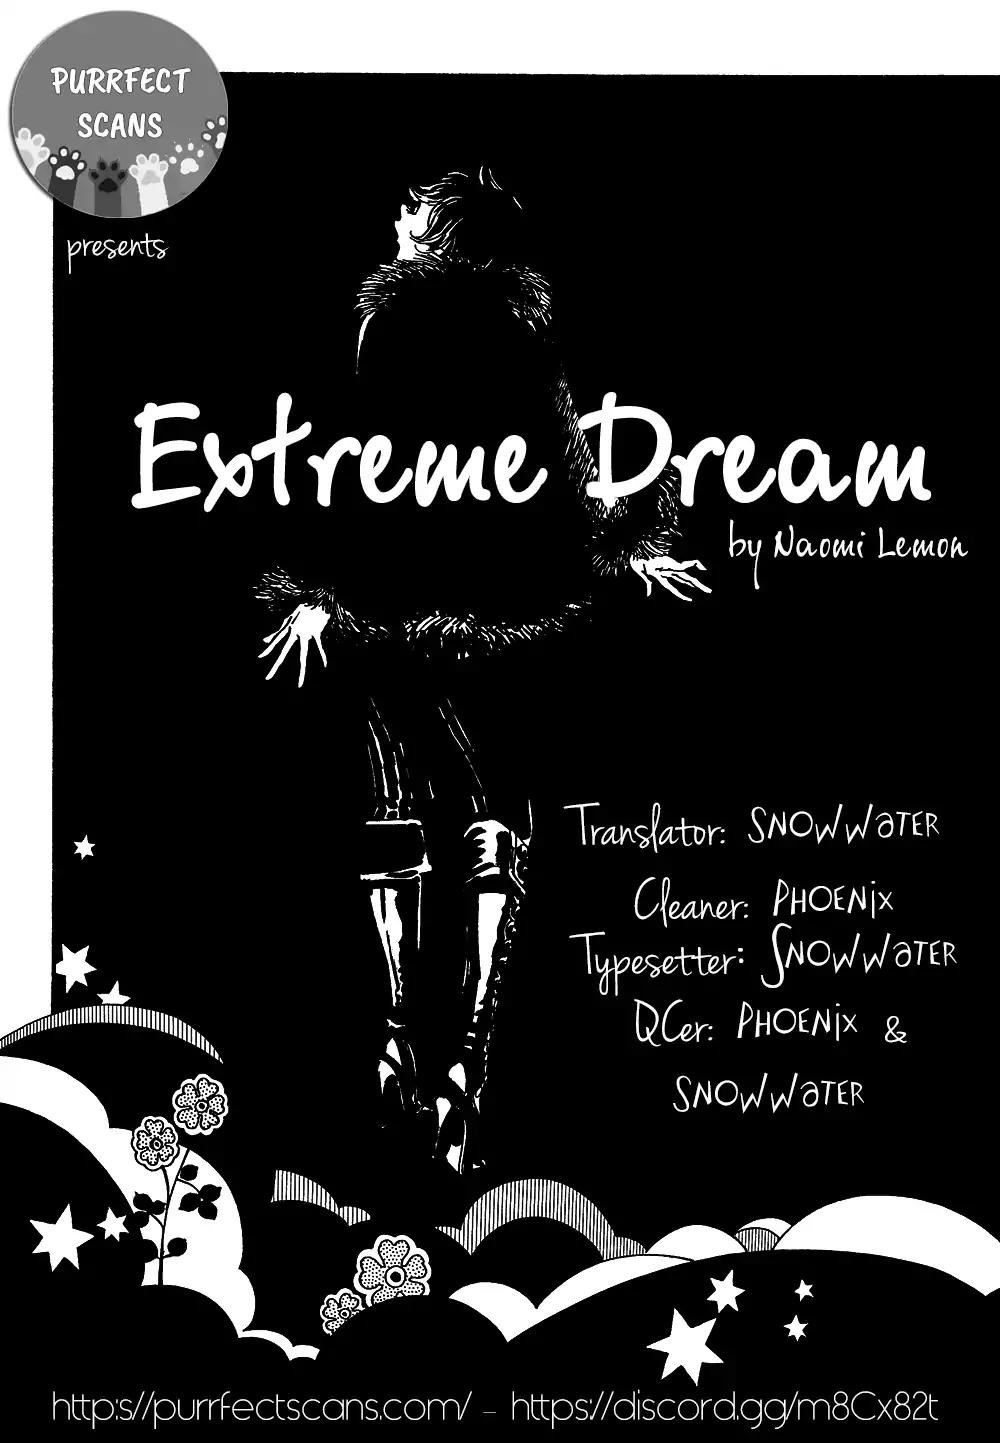 Extreme Dream Vol.1 Chapter 6: